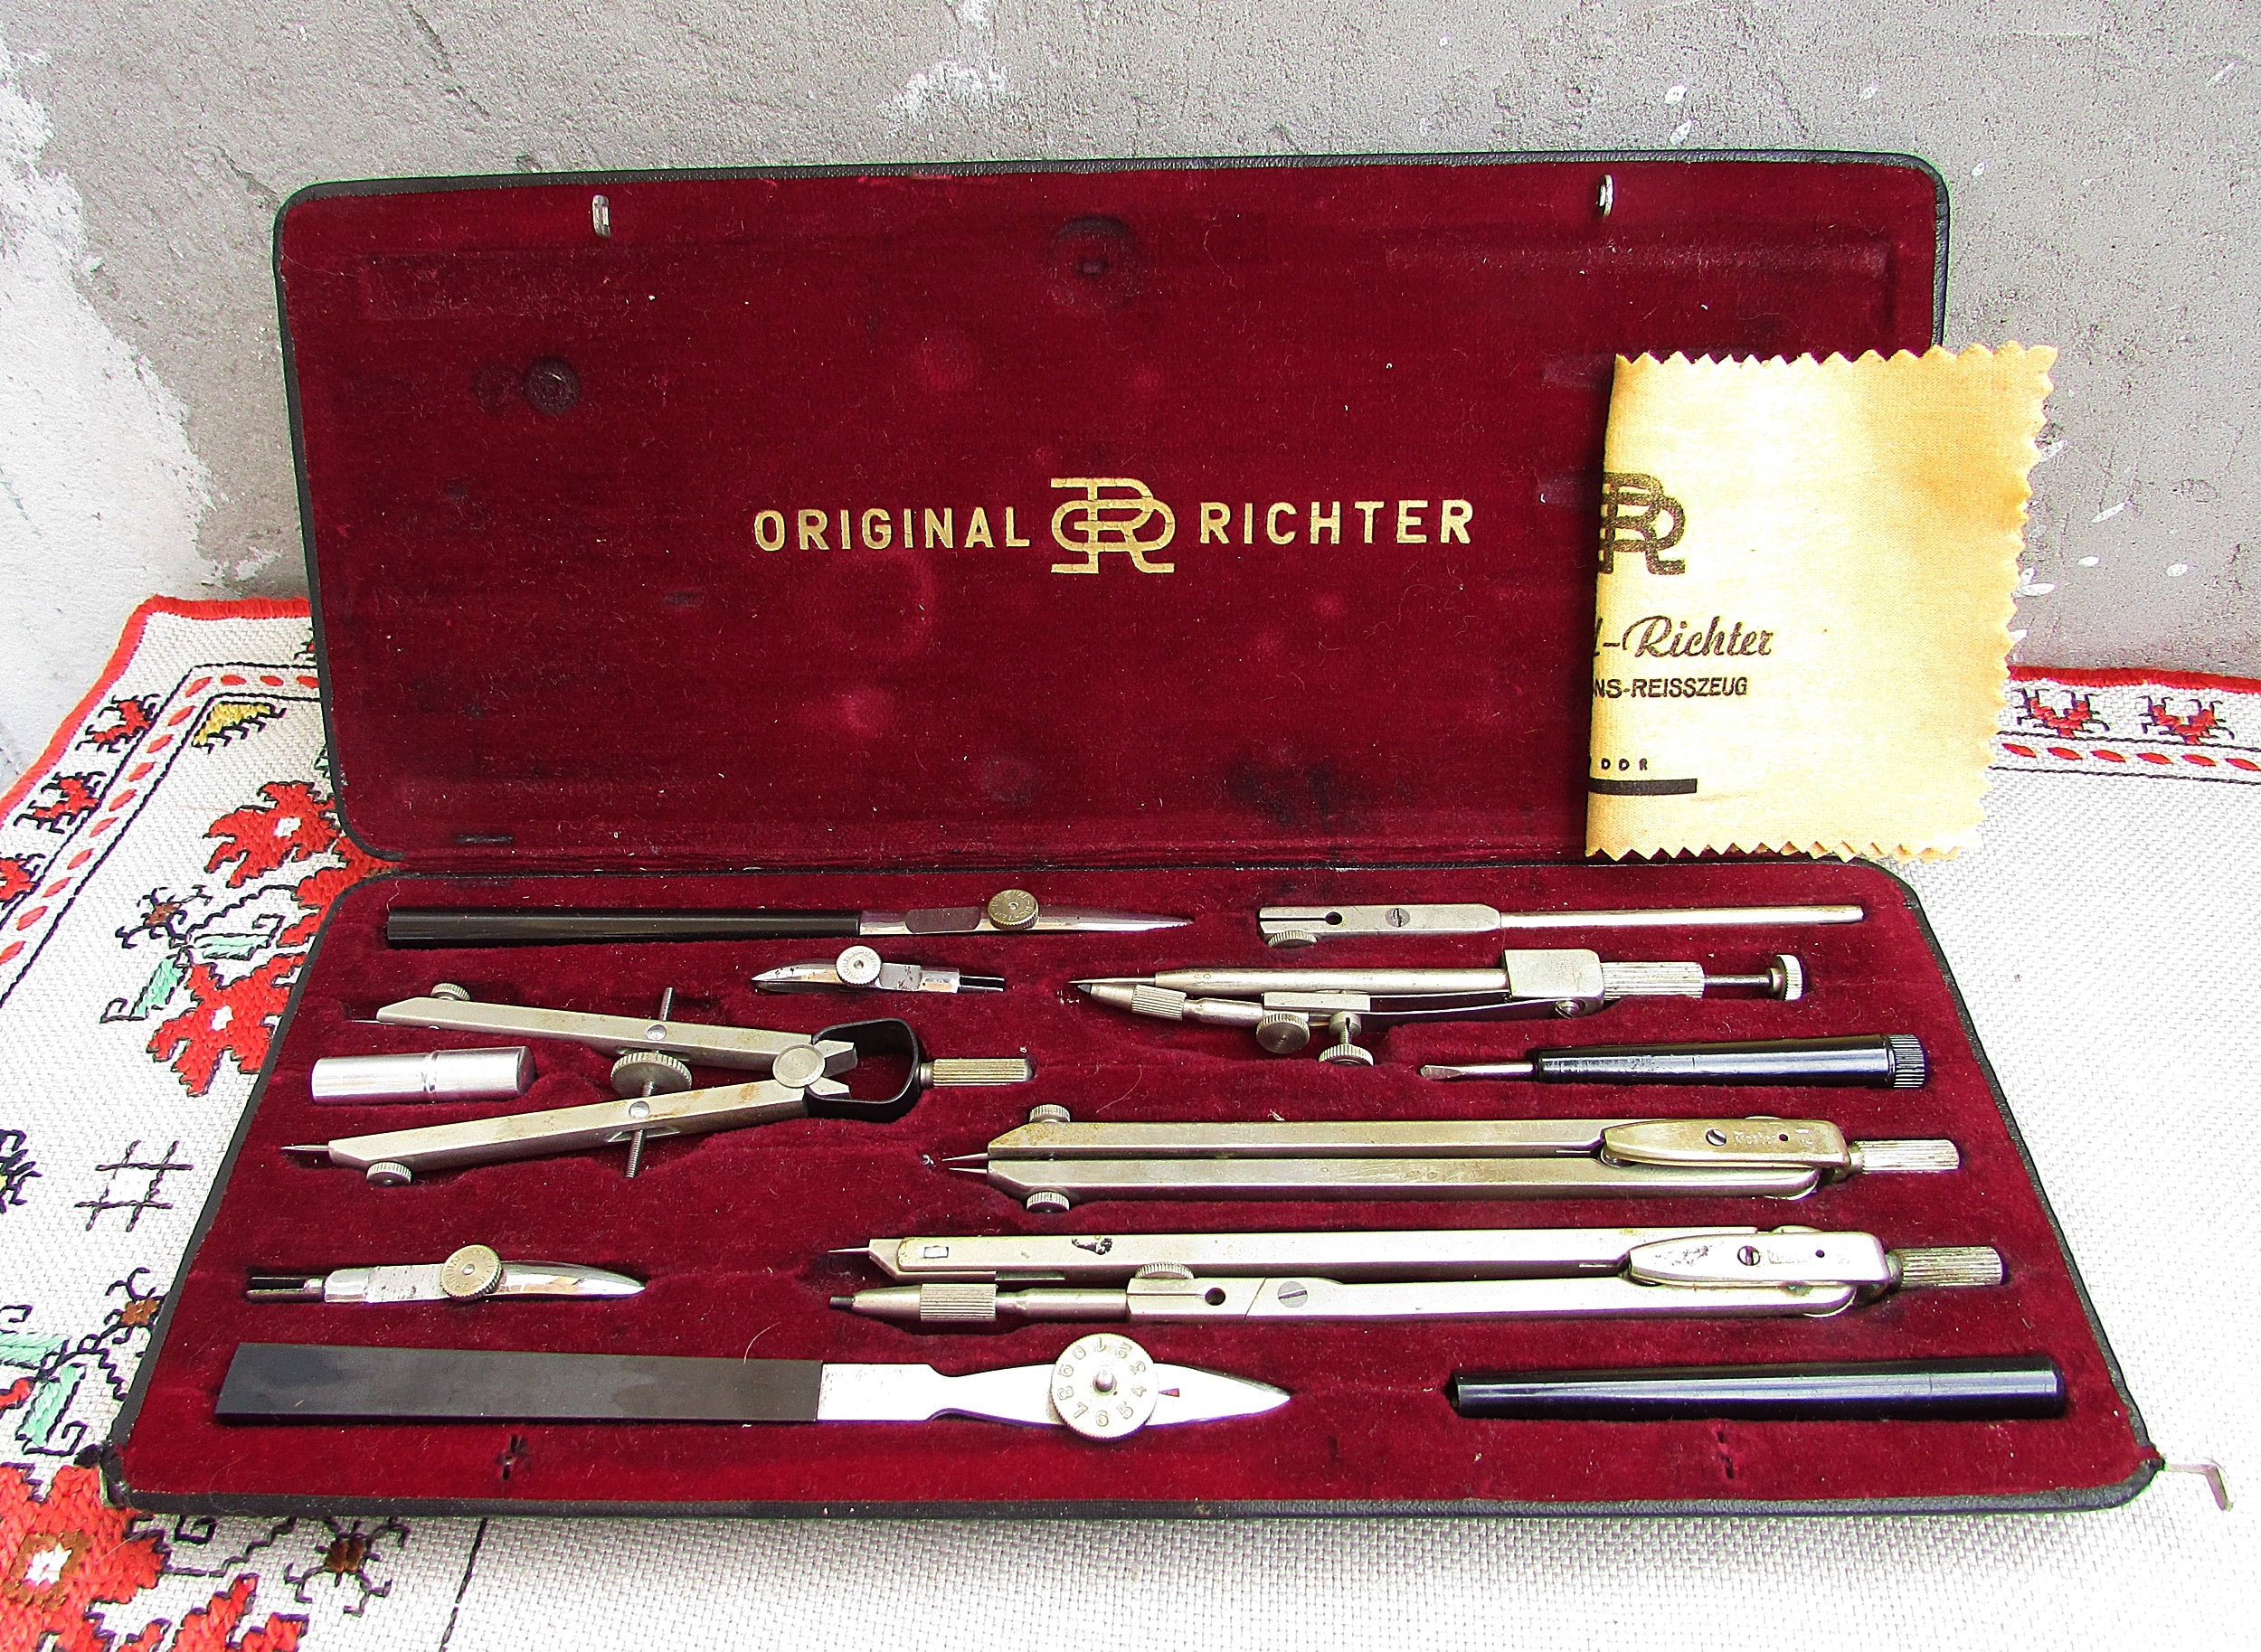 Vintage Technical Drawing Set, GRAMERCY Professional Drawing Set, Drafting  Tools, Drawing Case Set,drafting Set, Drawing Instruments, 